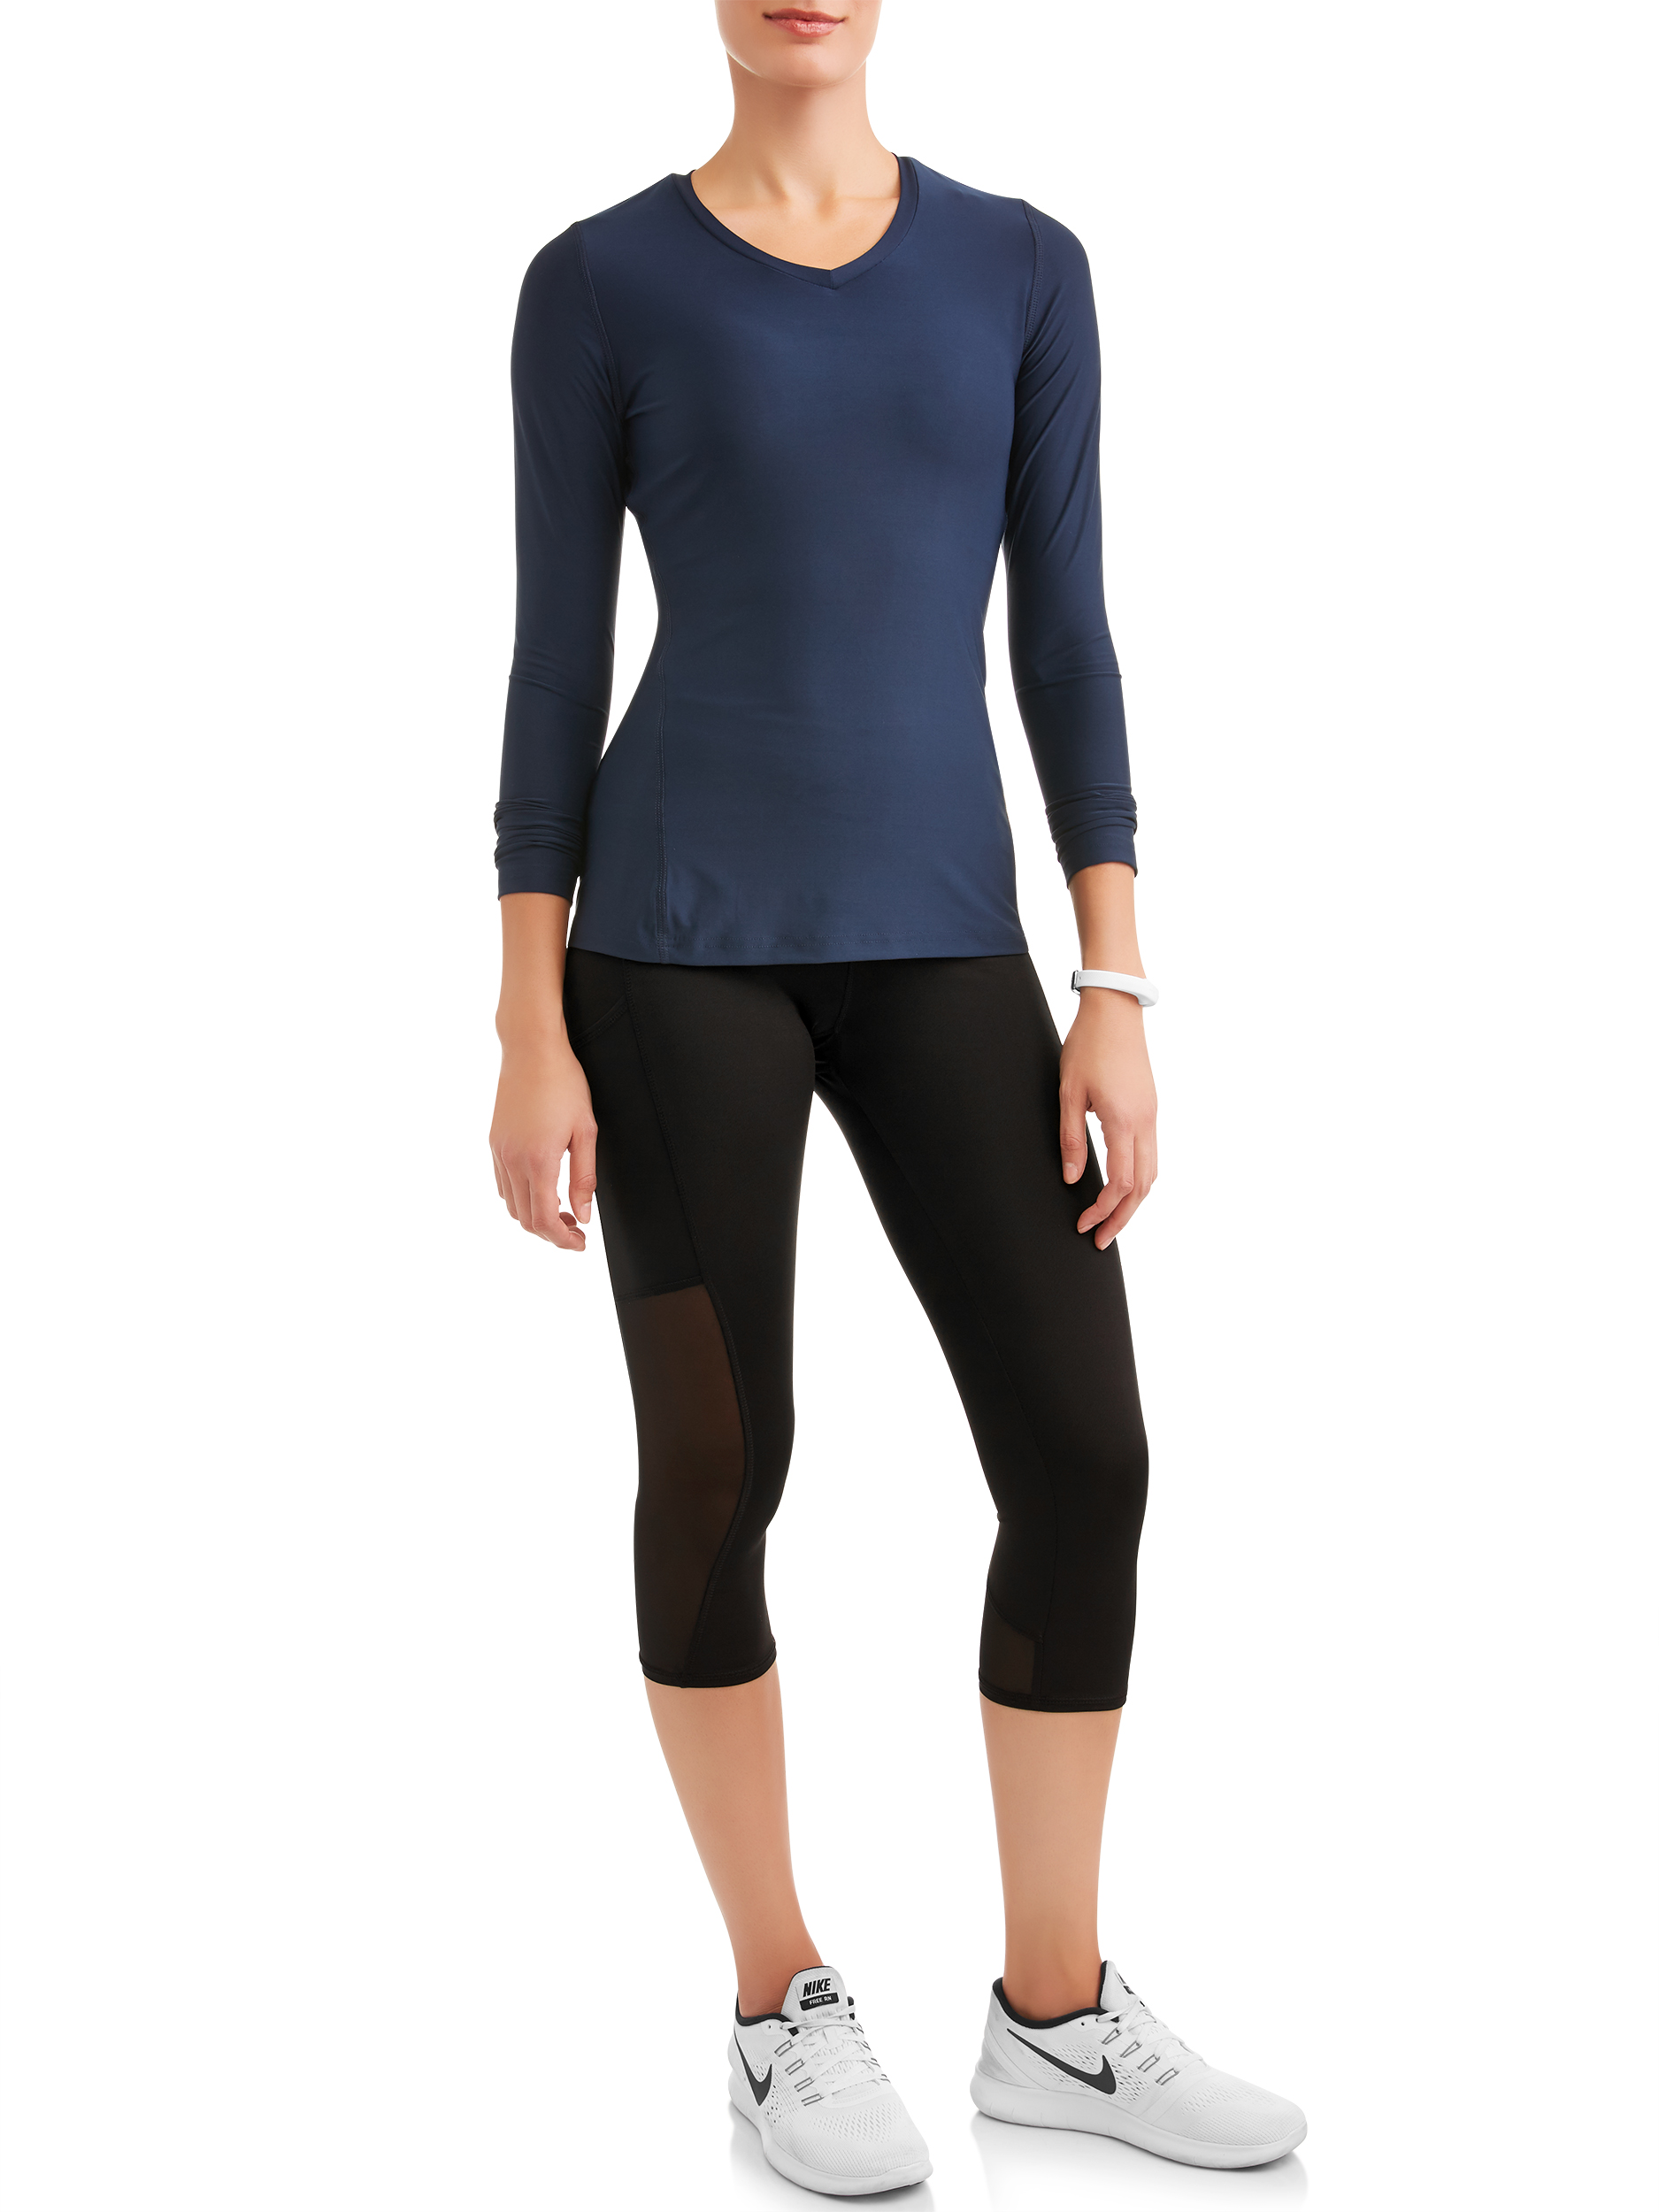 New York Laundry Women’s Active Long Sleeve V-Neck Mesh Top - image 3 of 4